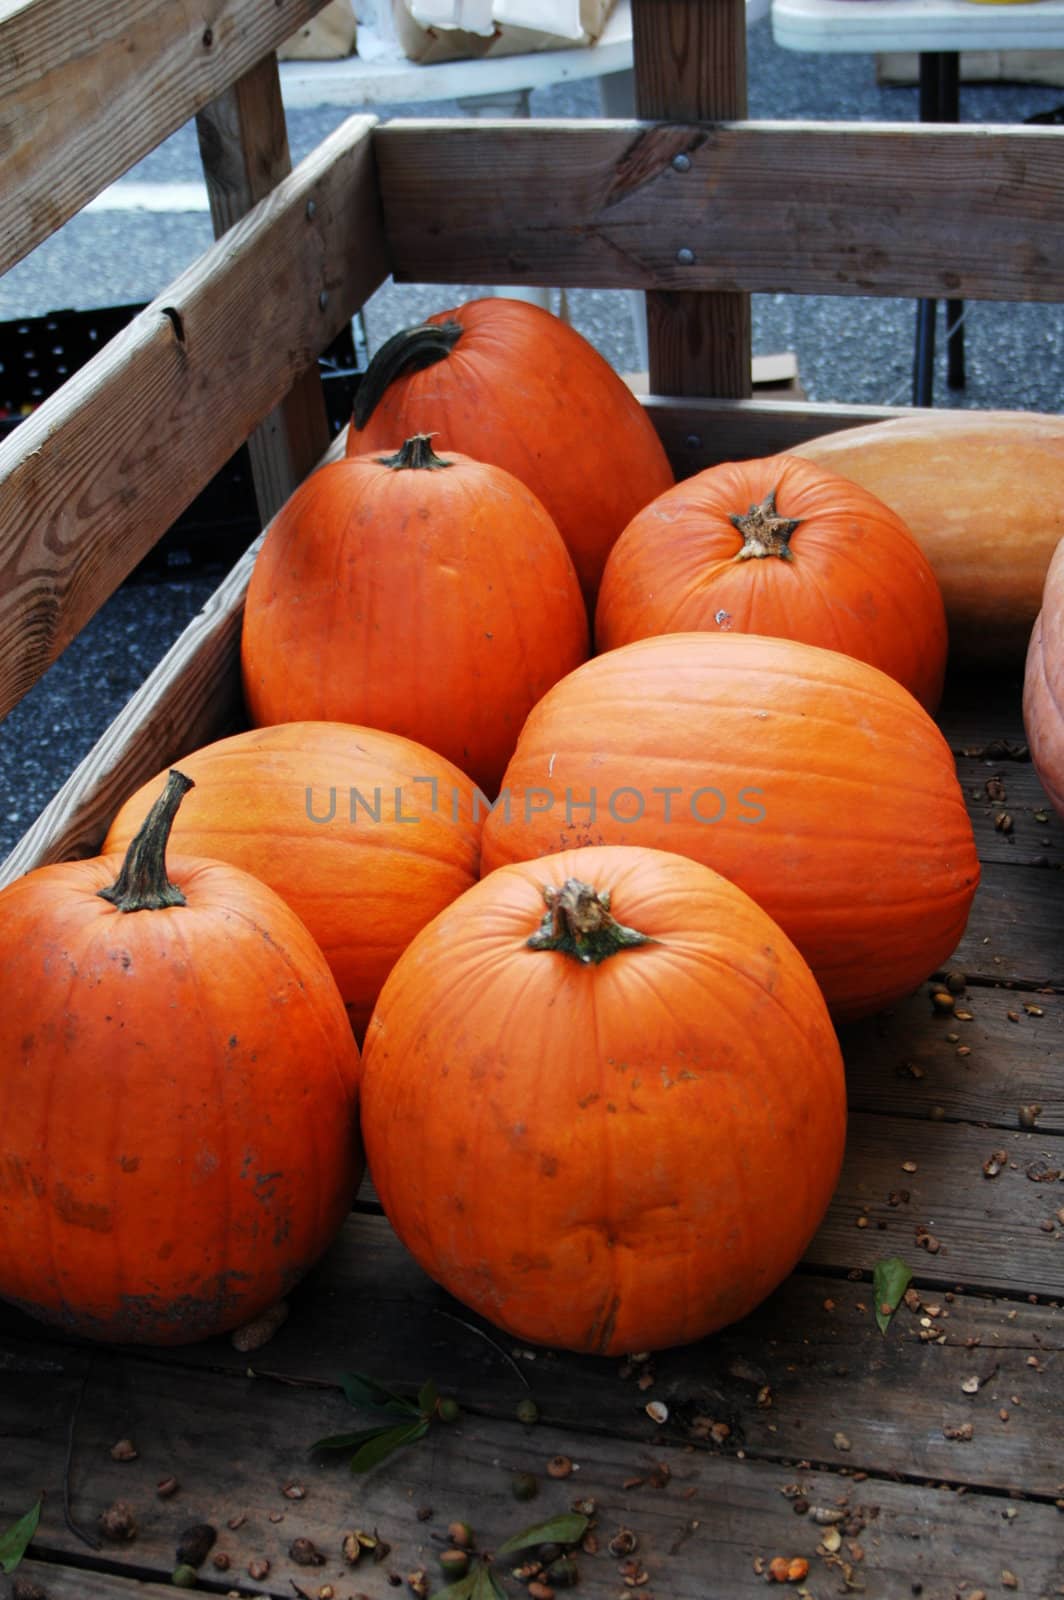 Pumpkins for sale at the market by northwoodsphoto